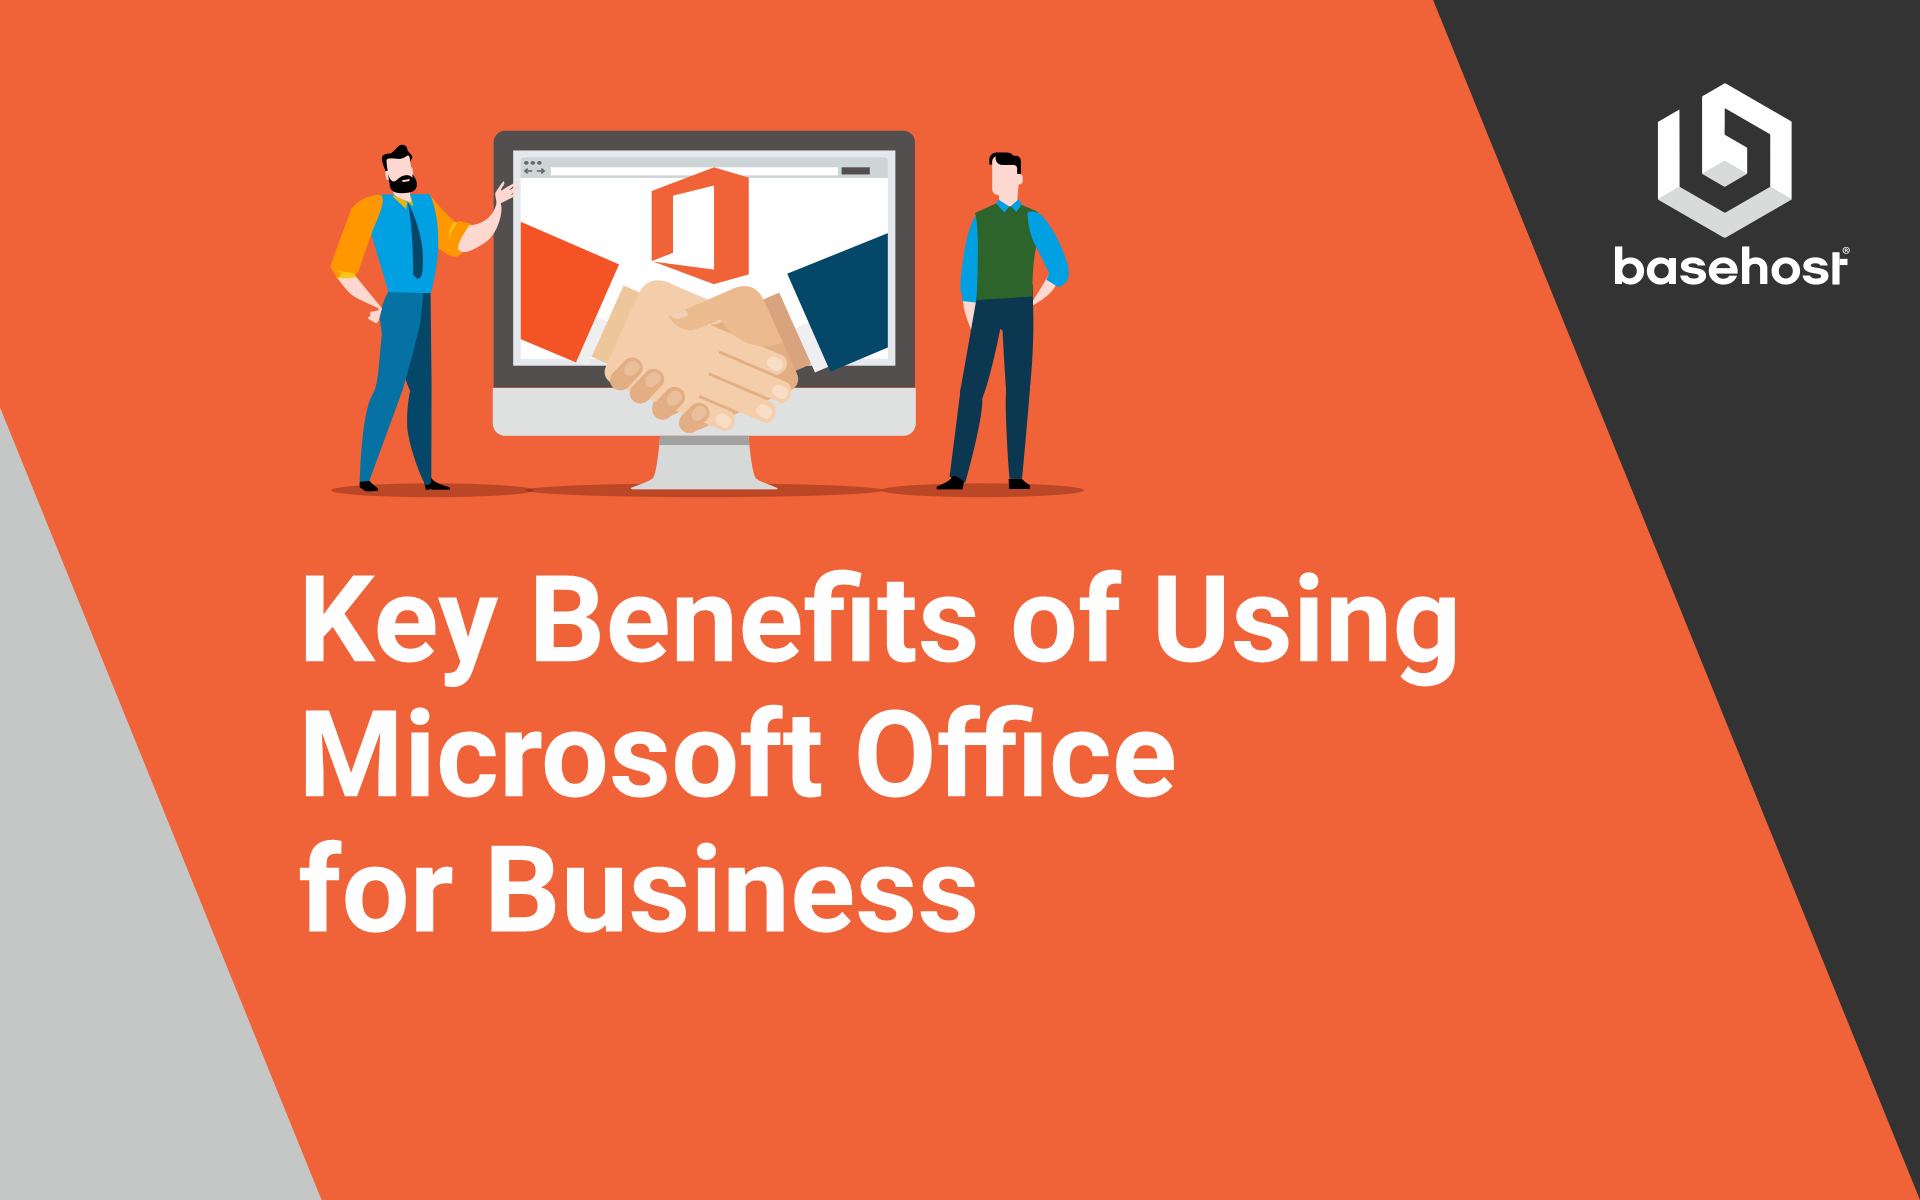 Key Benefits of Using Microsoft Office for Business - Fully IT and Marketing Service provider for Small to Medium Enterprises